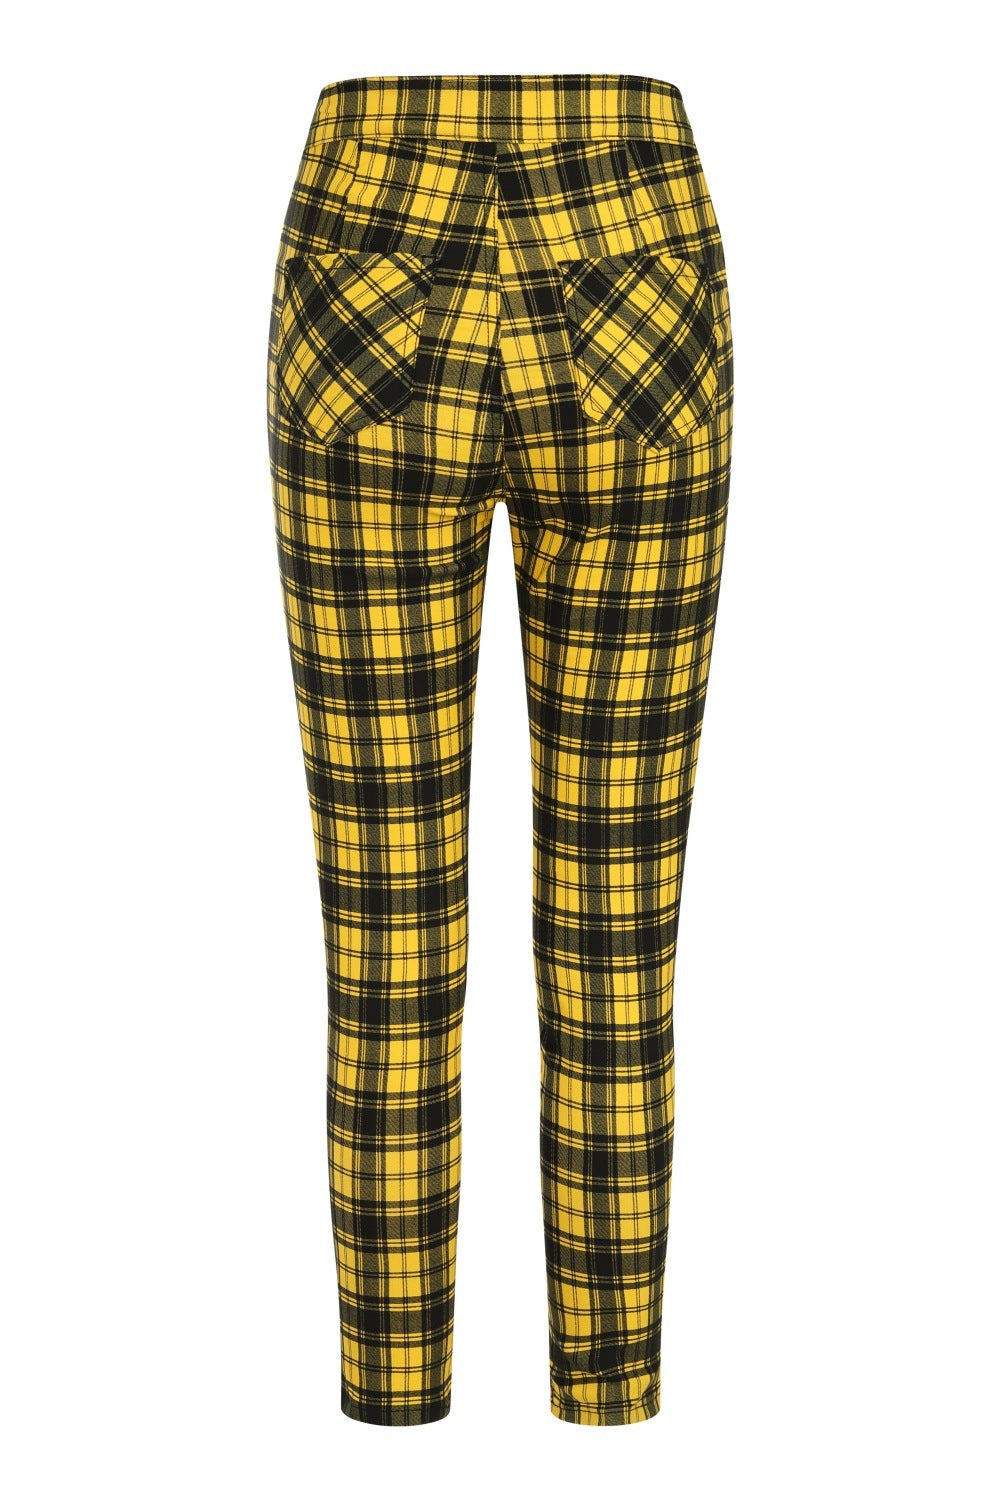 Red Tartan Checked Trousers Slim Plaid Pants (Made in the UK) | eBay